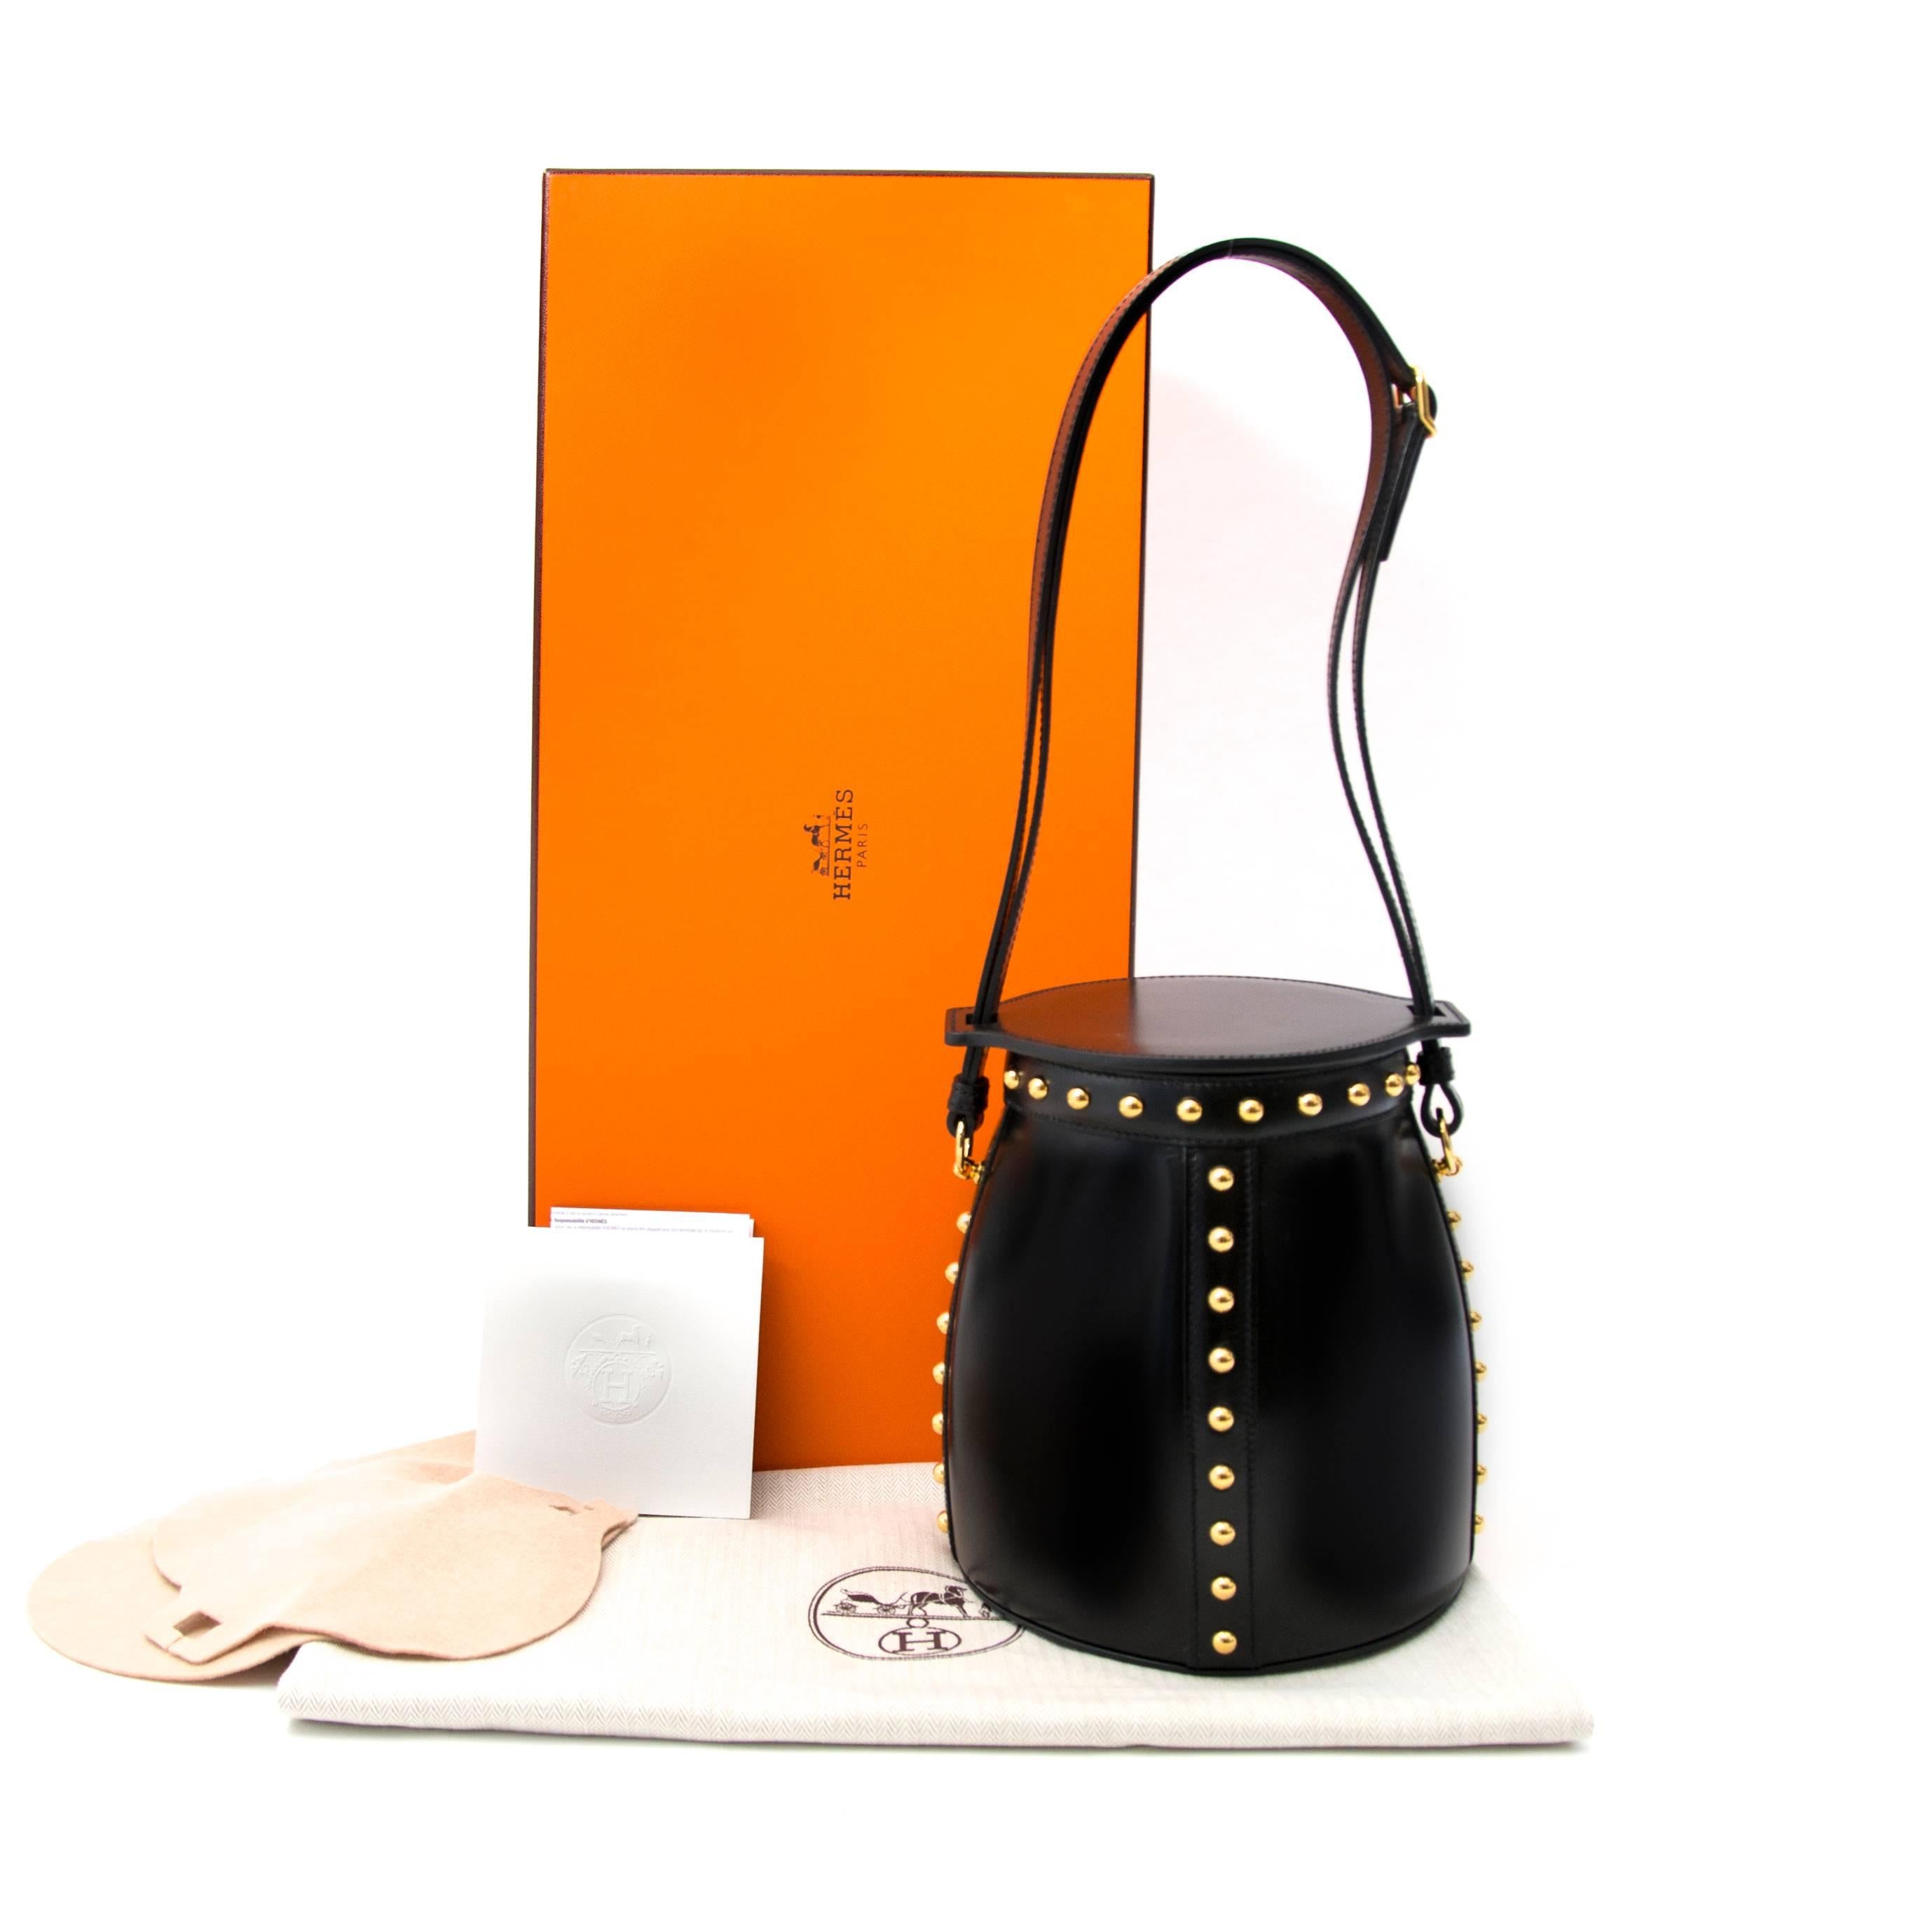 Never worn, sotre fresh

Hermès Farming Clouté Bag Box Calf Black

This Hermès Farming bag comes in black box calf leather featuring gold toned hardware. This piece a true eyecatcher with its golden studs and special design. The interior is made out